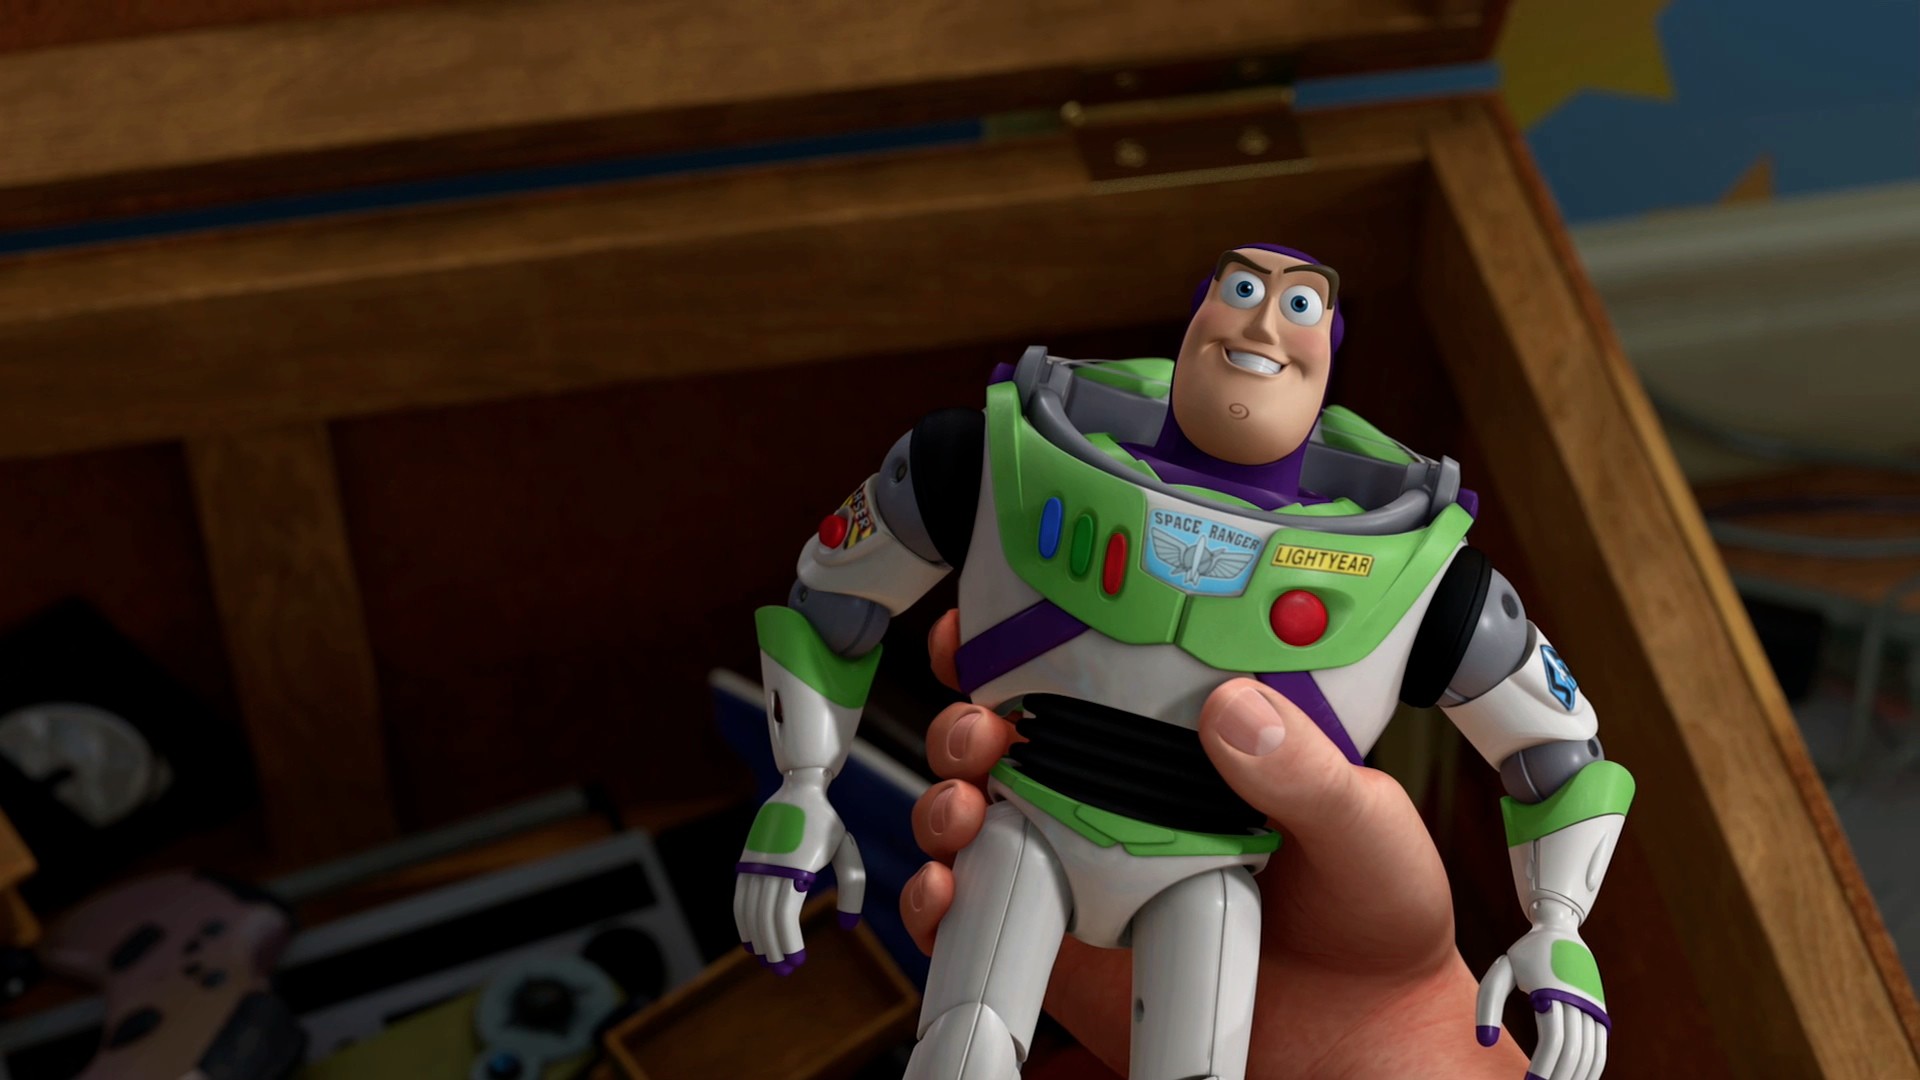 1920x1080 Toy Story HD Wallpaper | Background Image |  | ID:333907 -  Wallpaper Abyss